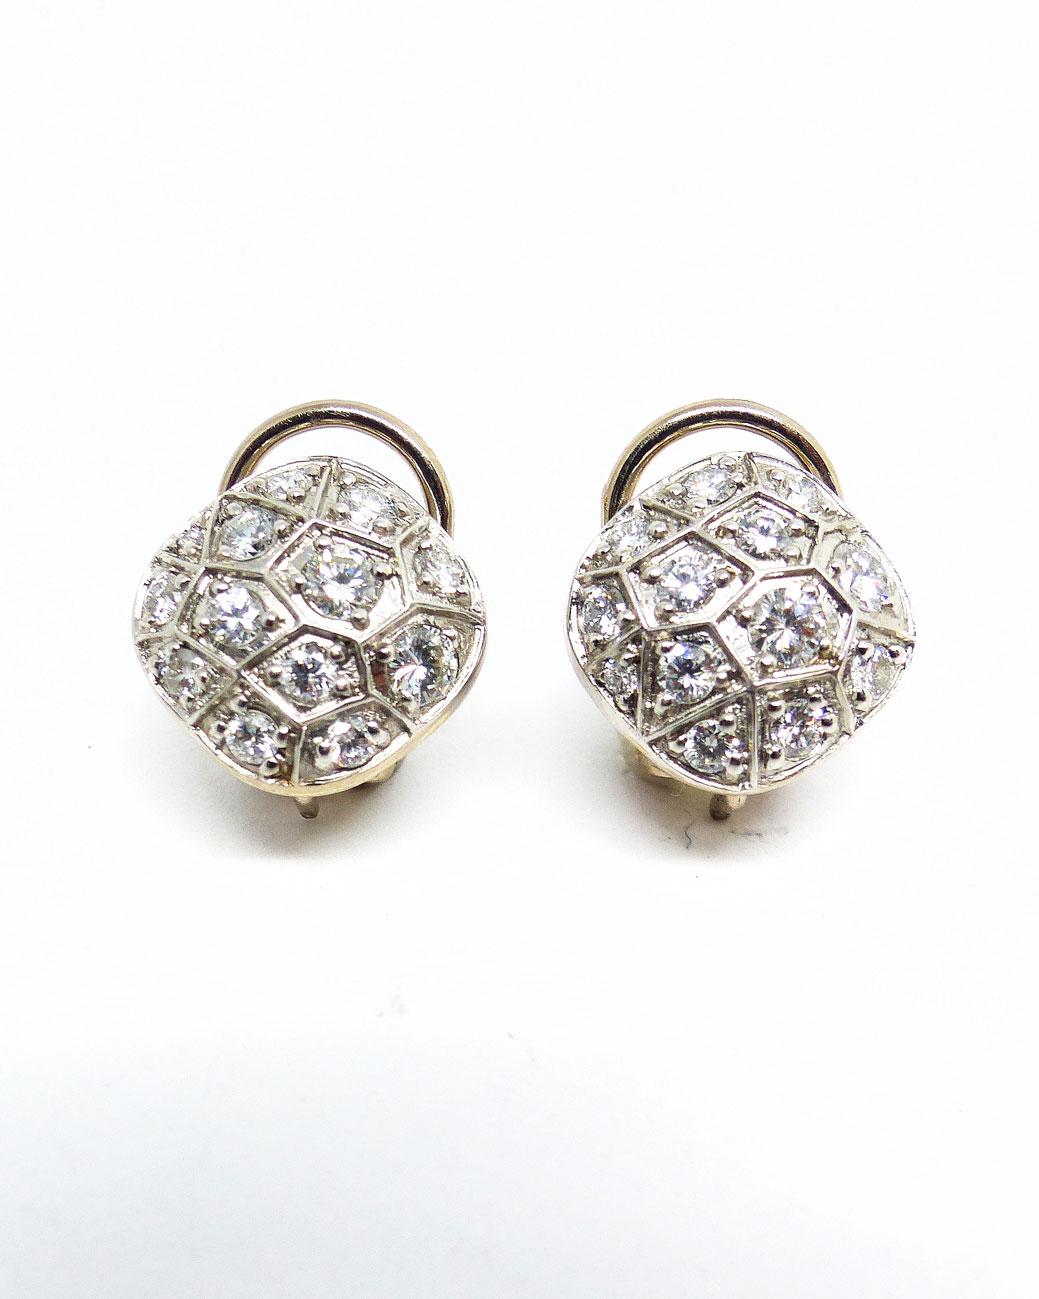 Women's Earrings in White Gold with 26 Diamonds, 1, 56ct.. For Sale